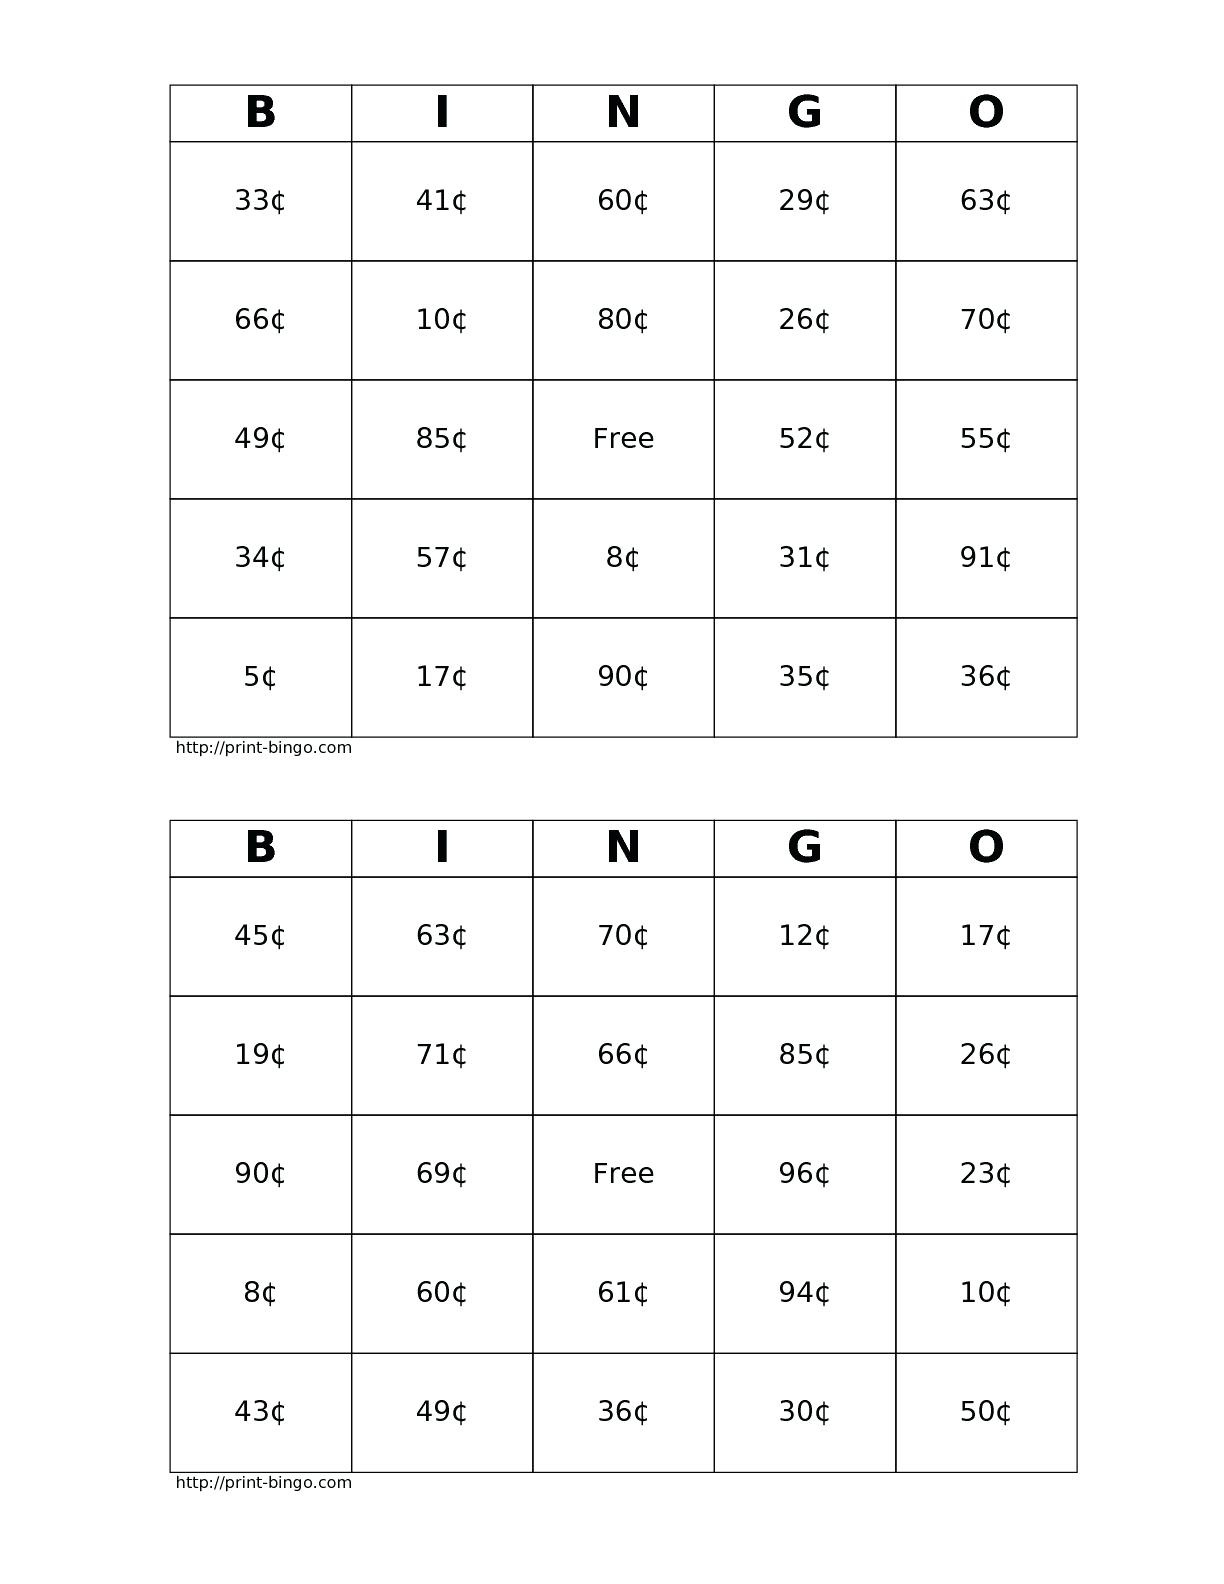 multiplication-bingo-to-practice-2s-4s-and-8s-facts-does-not-free